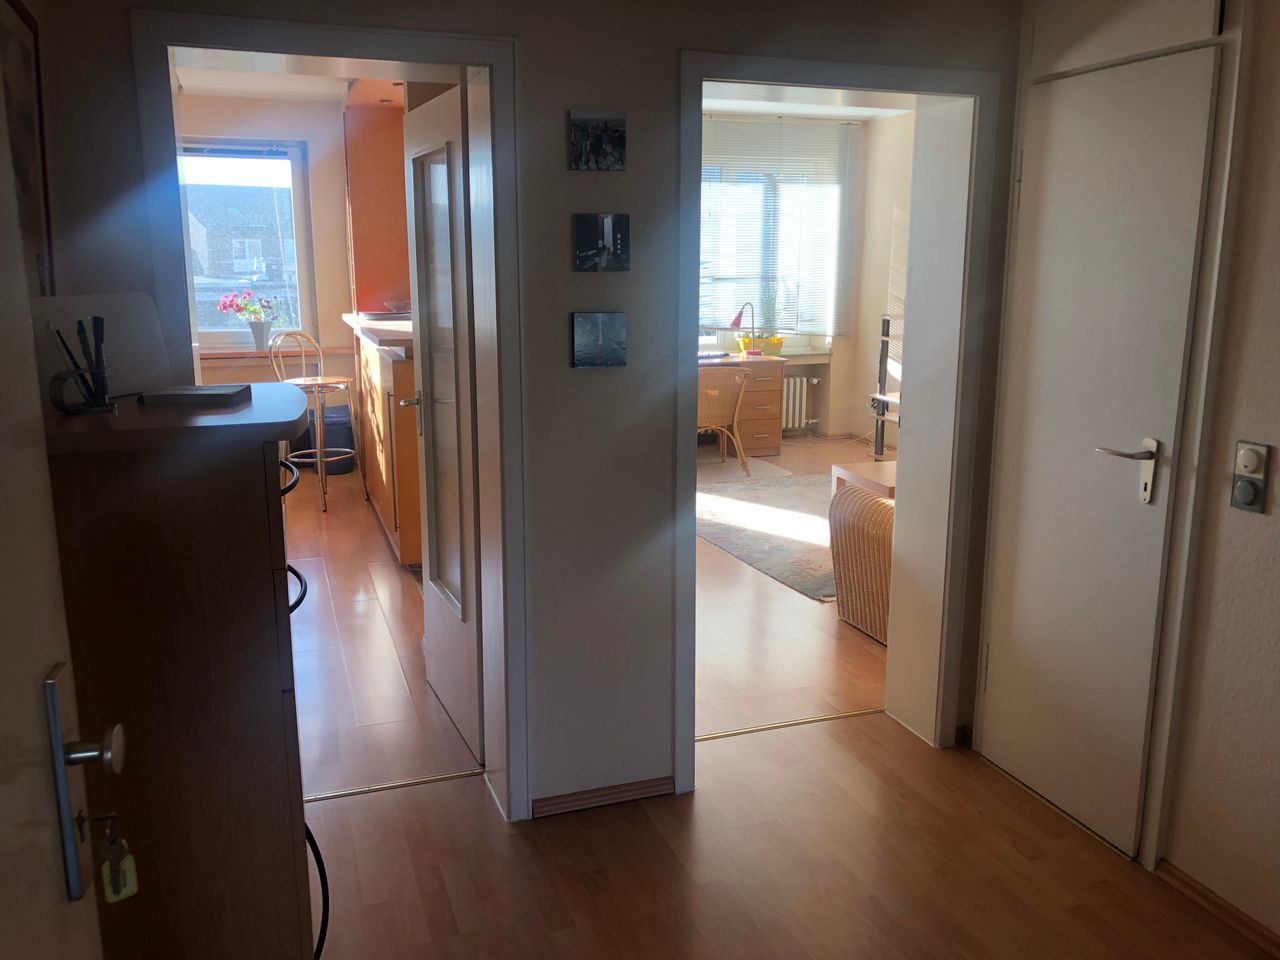 Appartement close to airport, Autobahn and train station